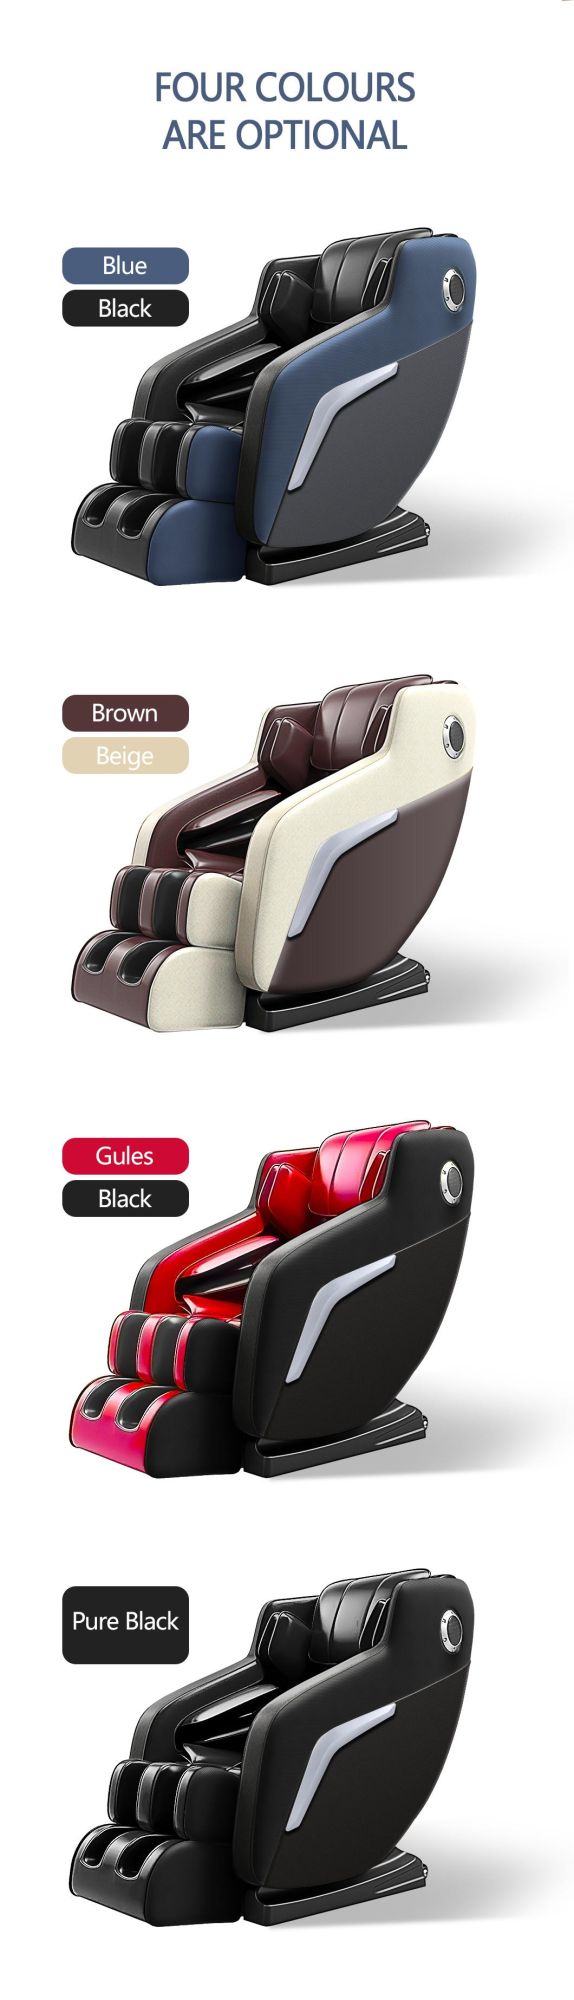 Wholesale Luxury Full Body Air Pressure Massage Chair Made in China